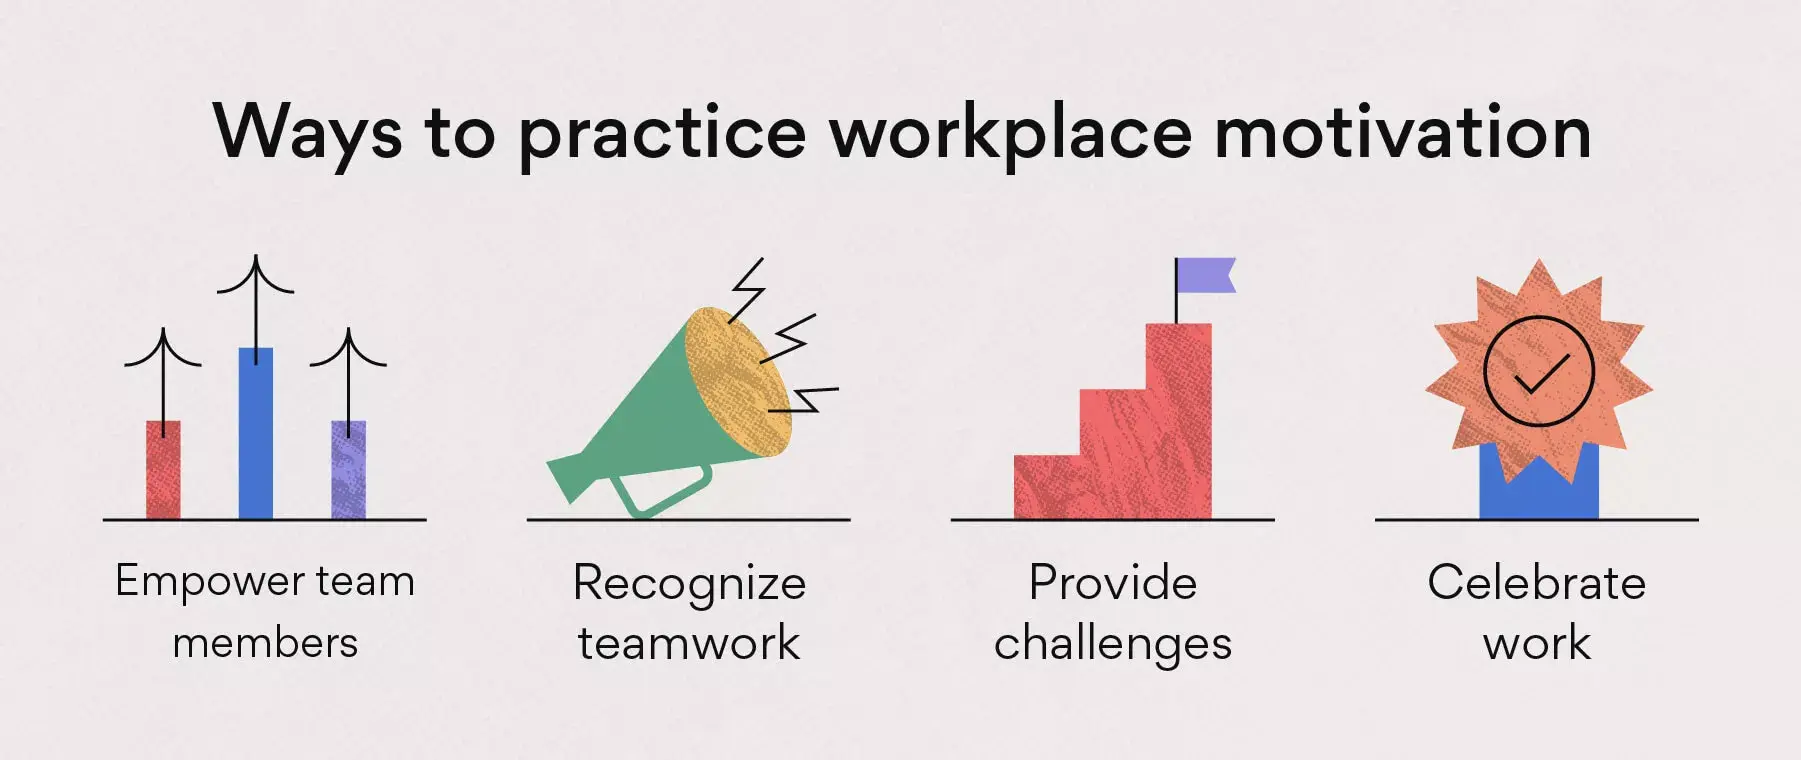 Ways to practice workplace motivation